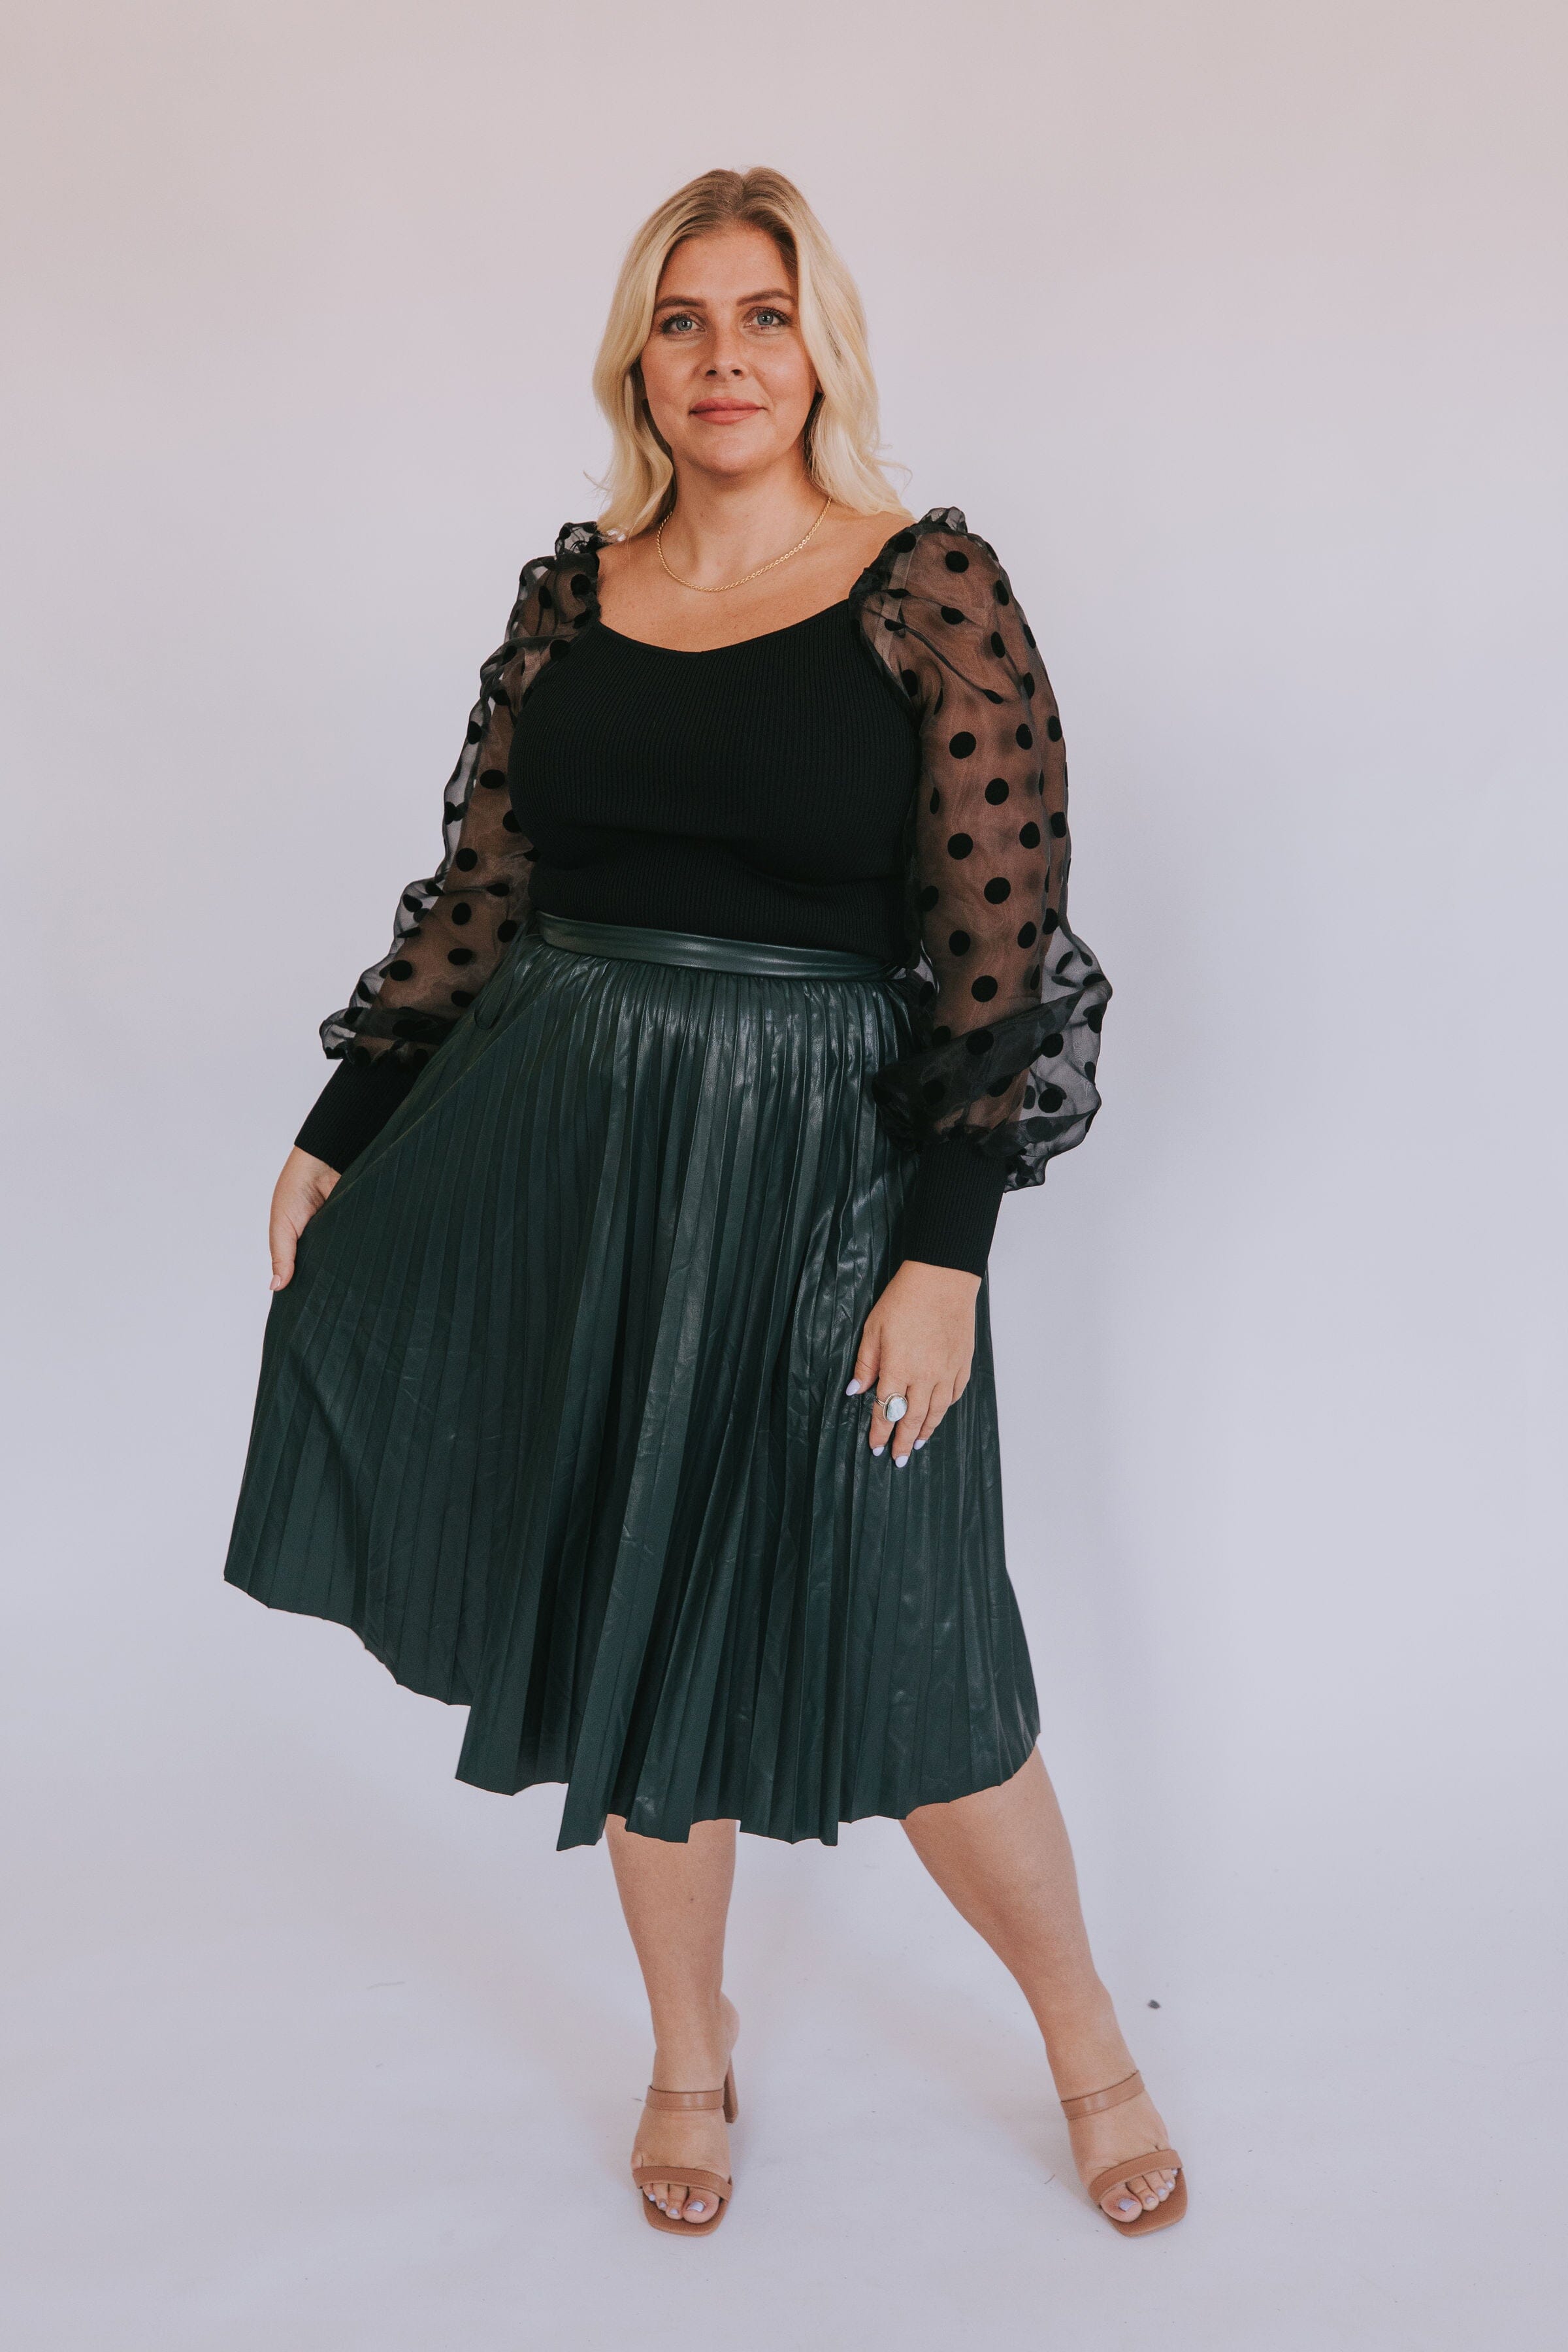 PLUS SIZE - Gather Together Top